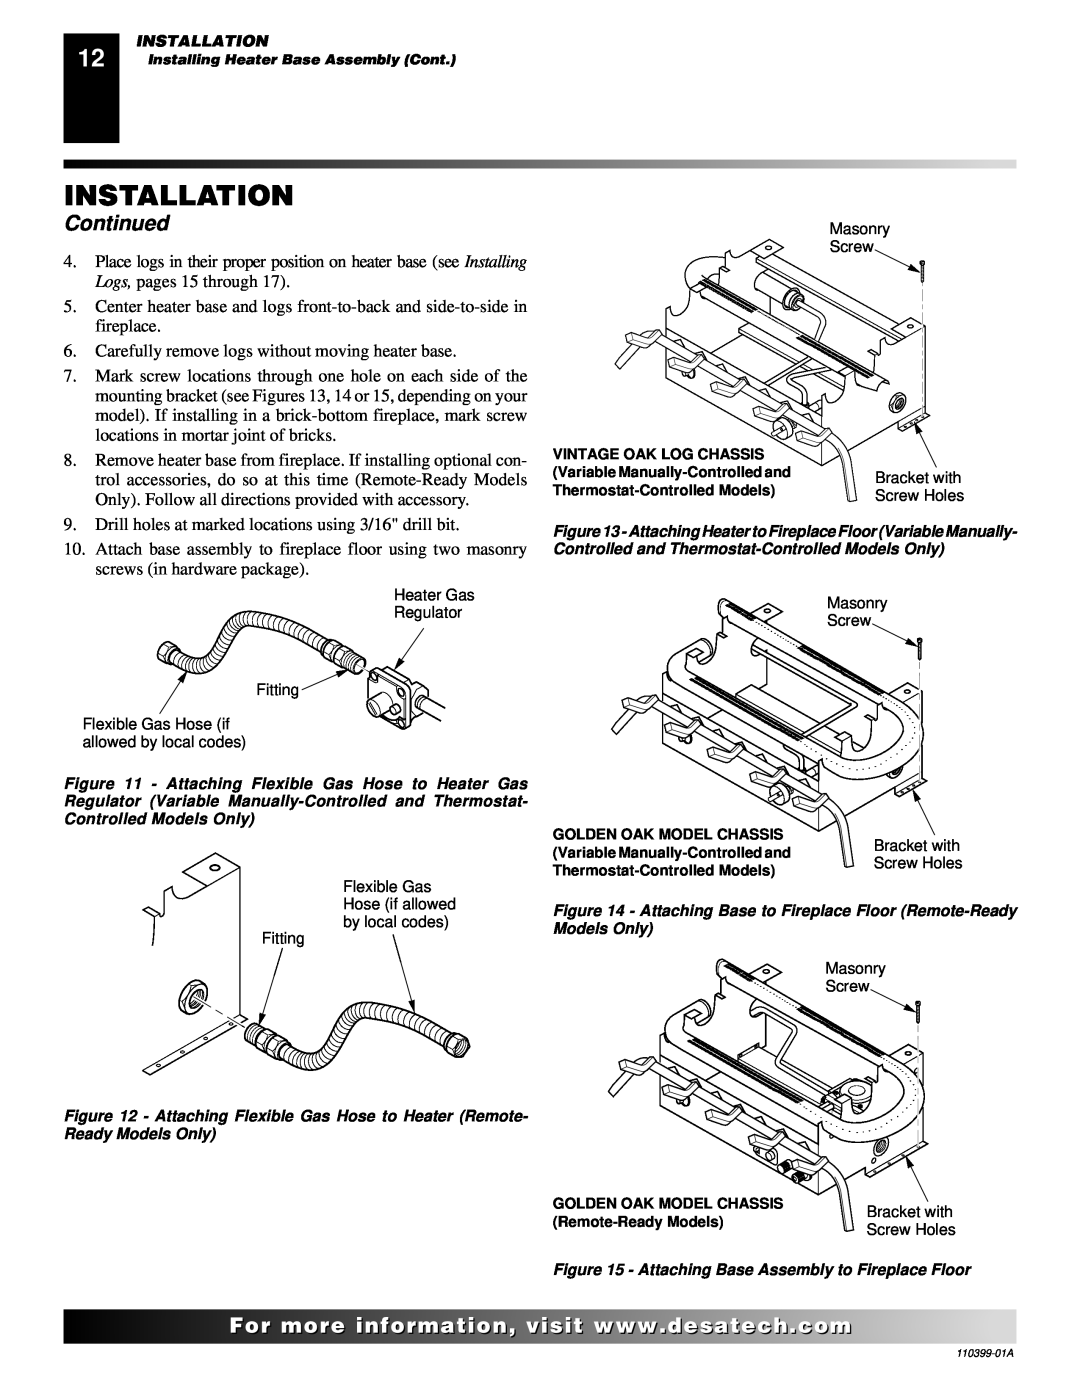 Desa FLAME-MAX Golden, FLAME-MAX Vintage installation manual Installation, Continued, Logs, pages 15 through 